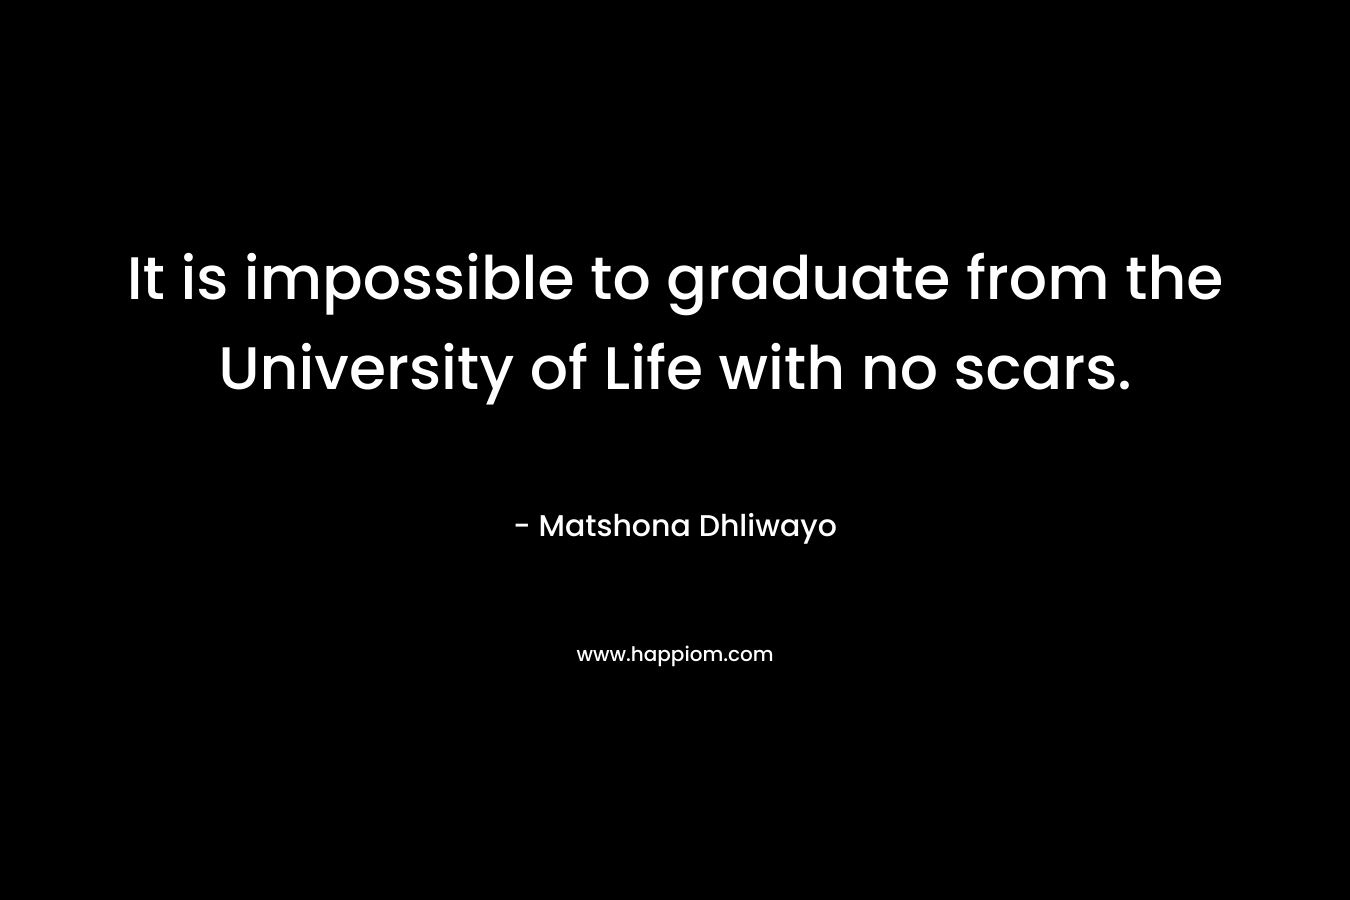 It is impossible to graduate from the University of Life with no scars.